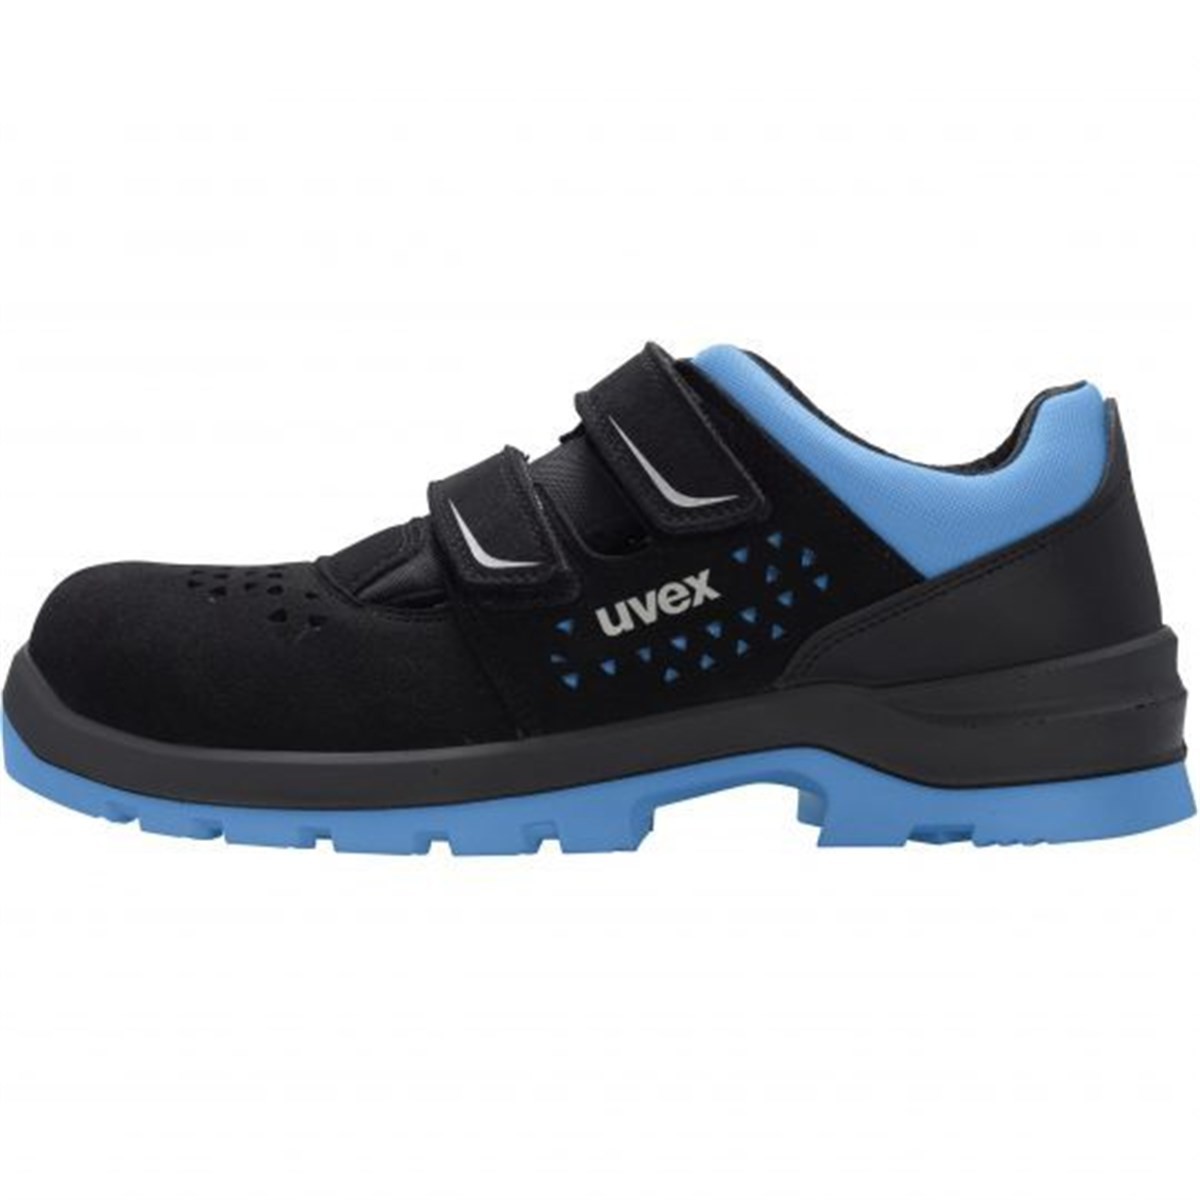 UVEX 9553 S1P SRC ESD WORK SHOES